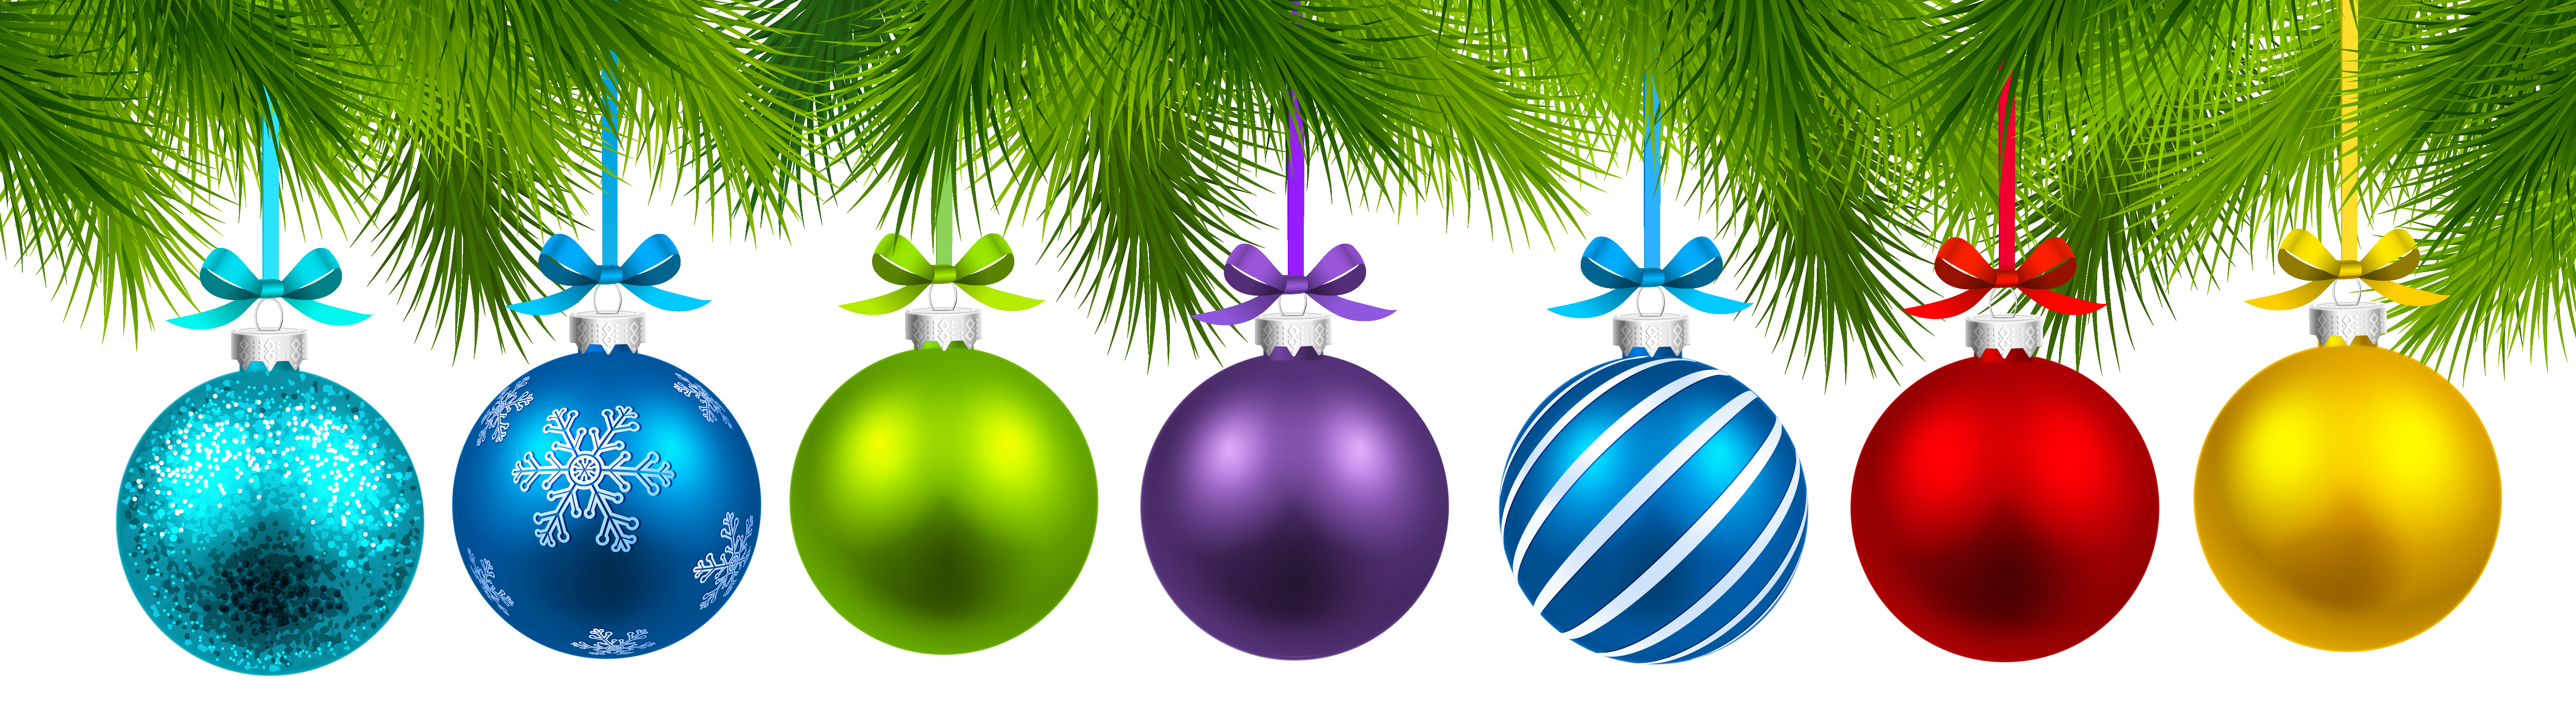 Christmas Balls Decor PNG Clipart Image | Gallery Yopriceville ...